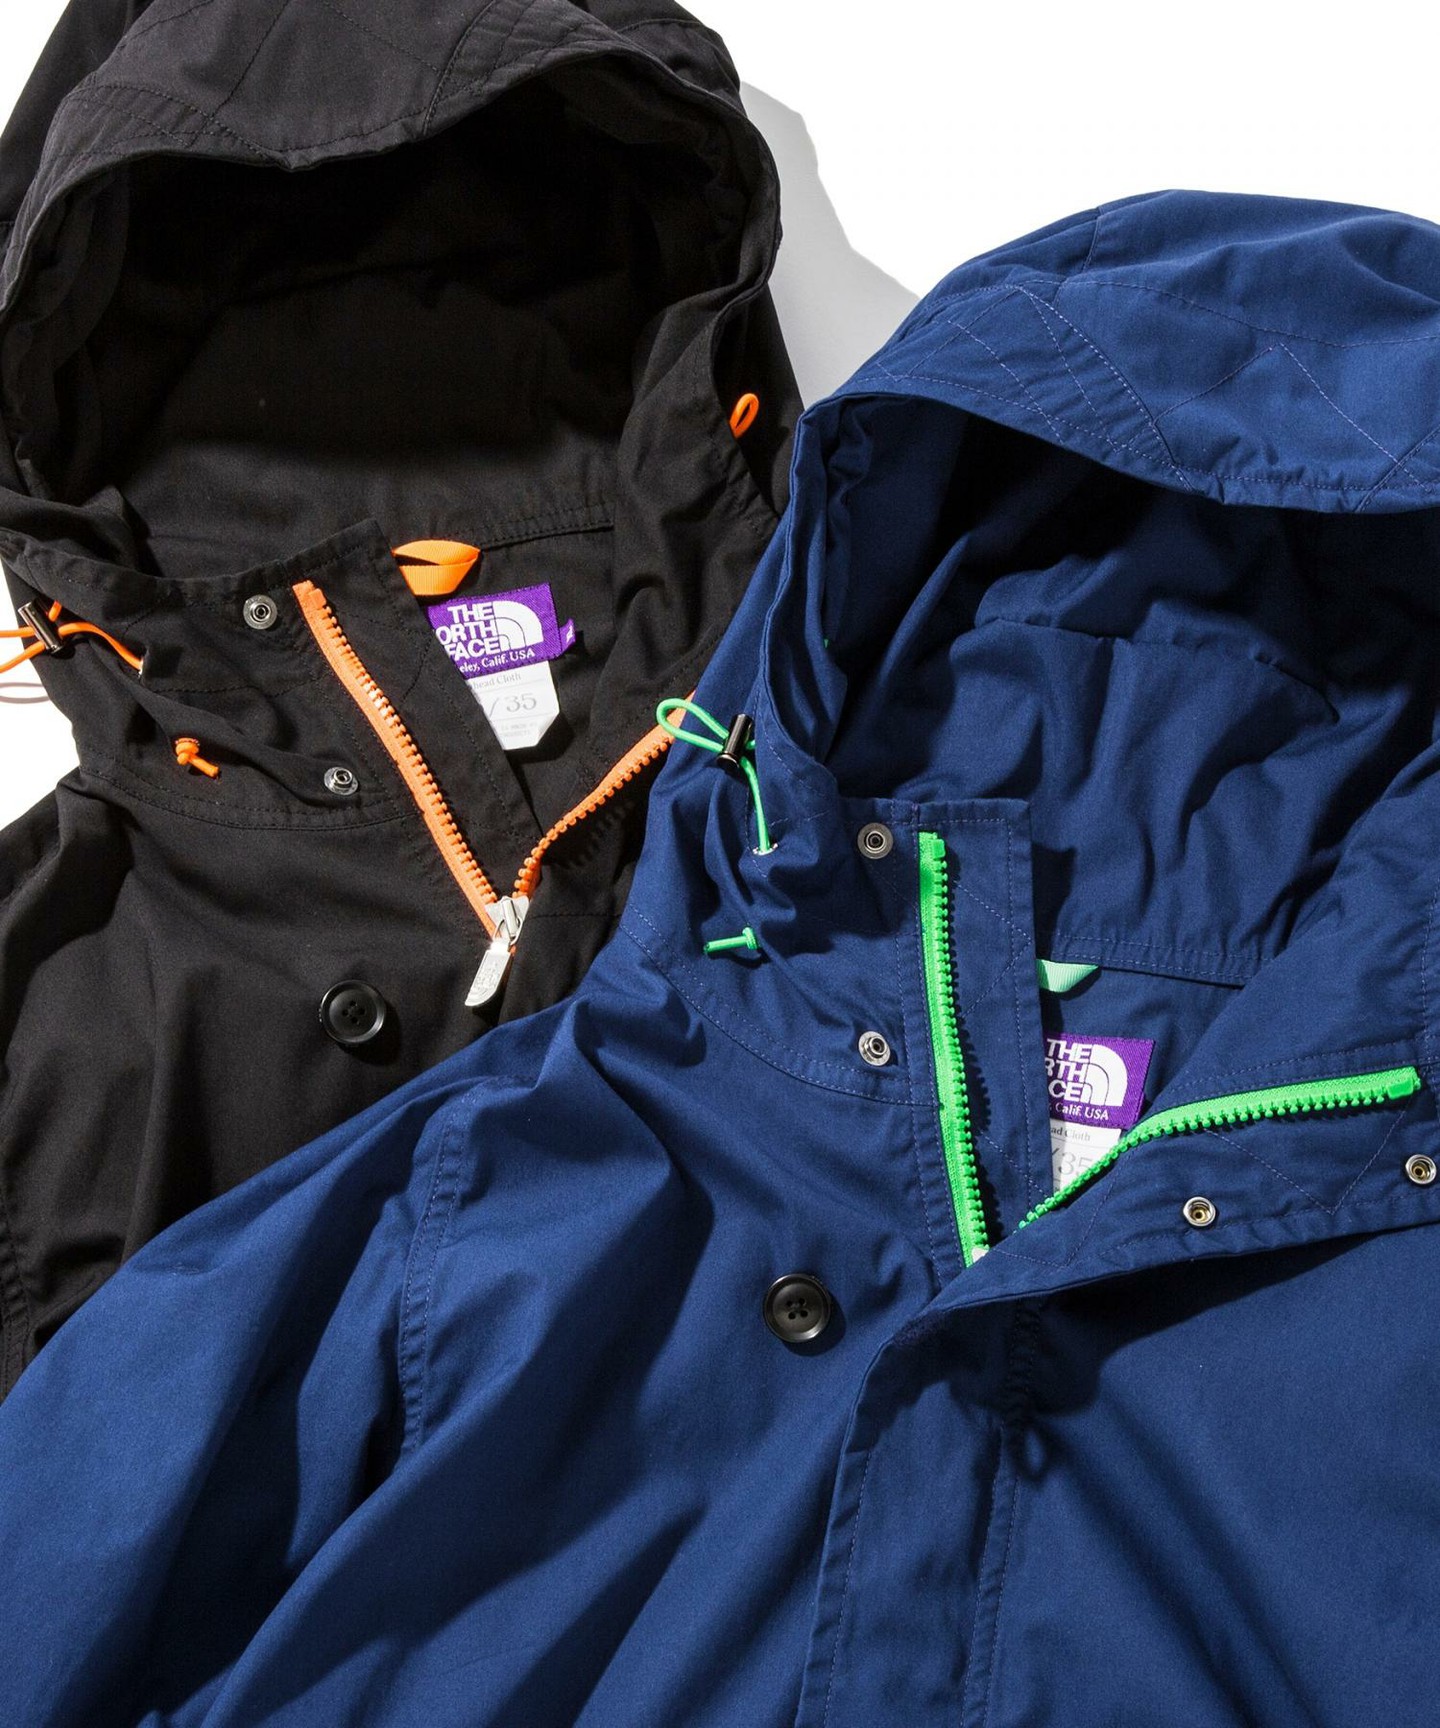 monkey time and The North Face Purple Label unveils their 